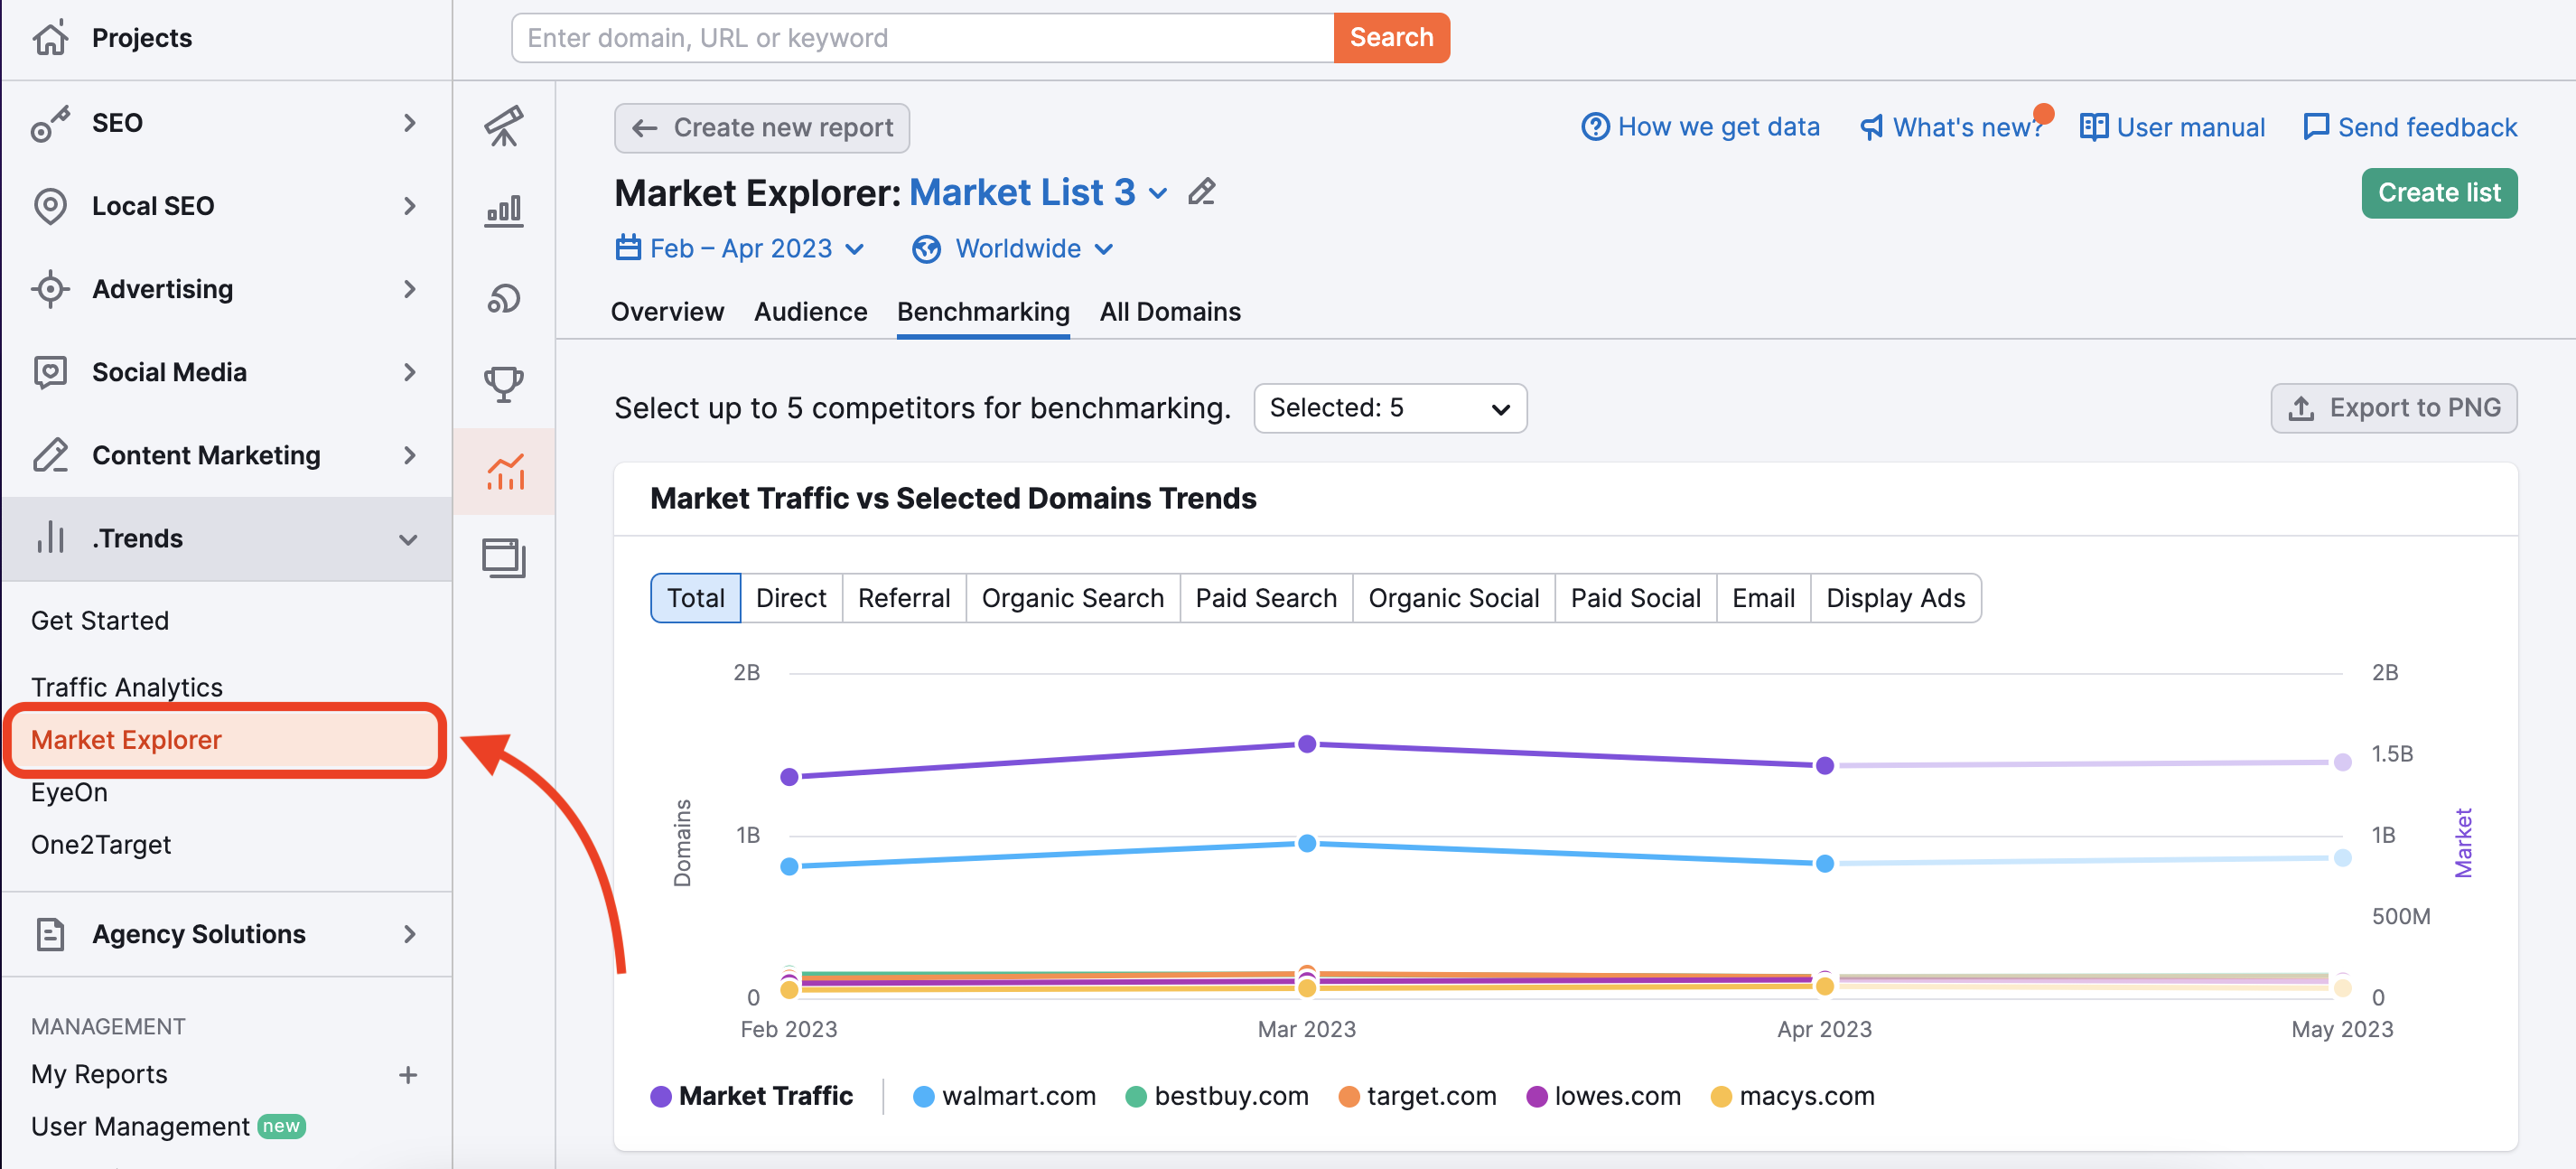 An example of Benchmarking report in Market Explorer featuring the Market Traffic vs Selected Domains Trends graph. A red arrow is pointing at the name of the tool on the left to indicate where it can be found.